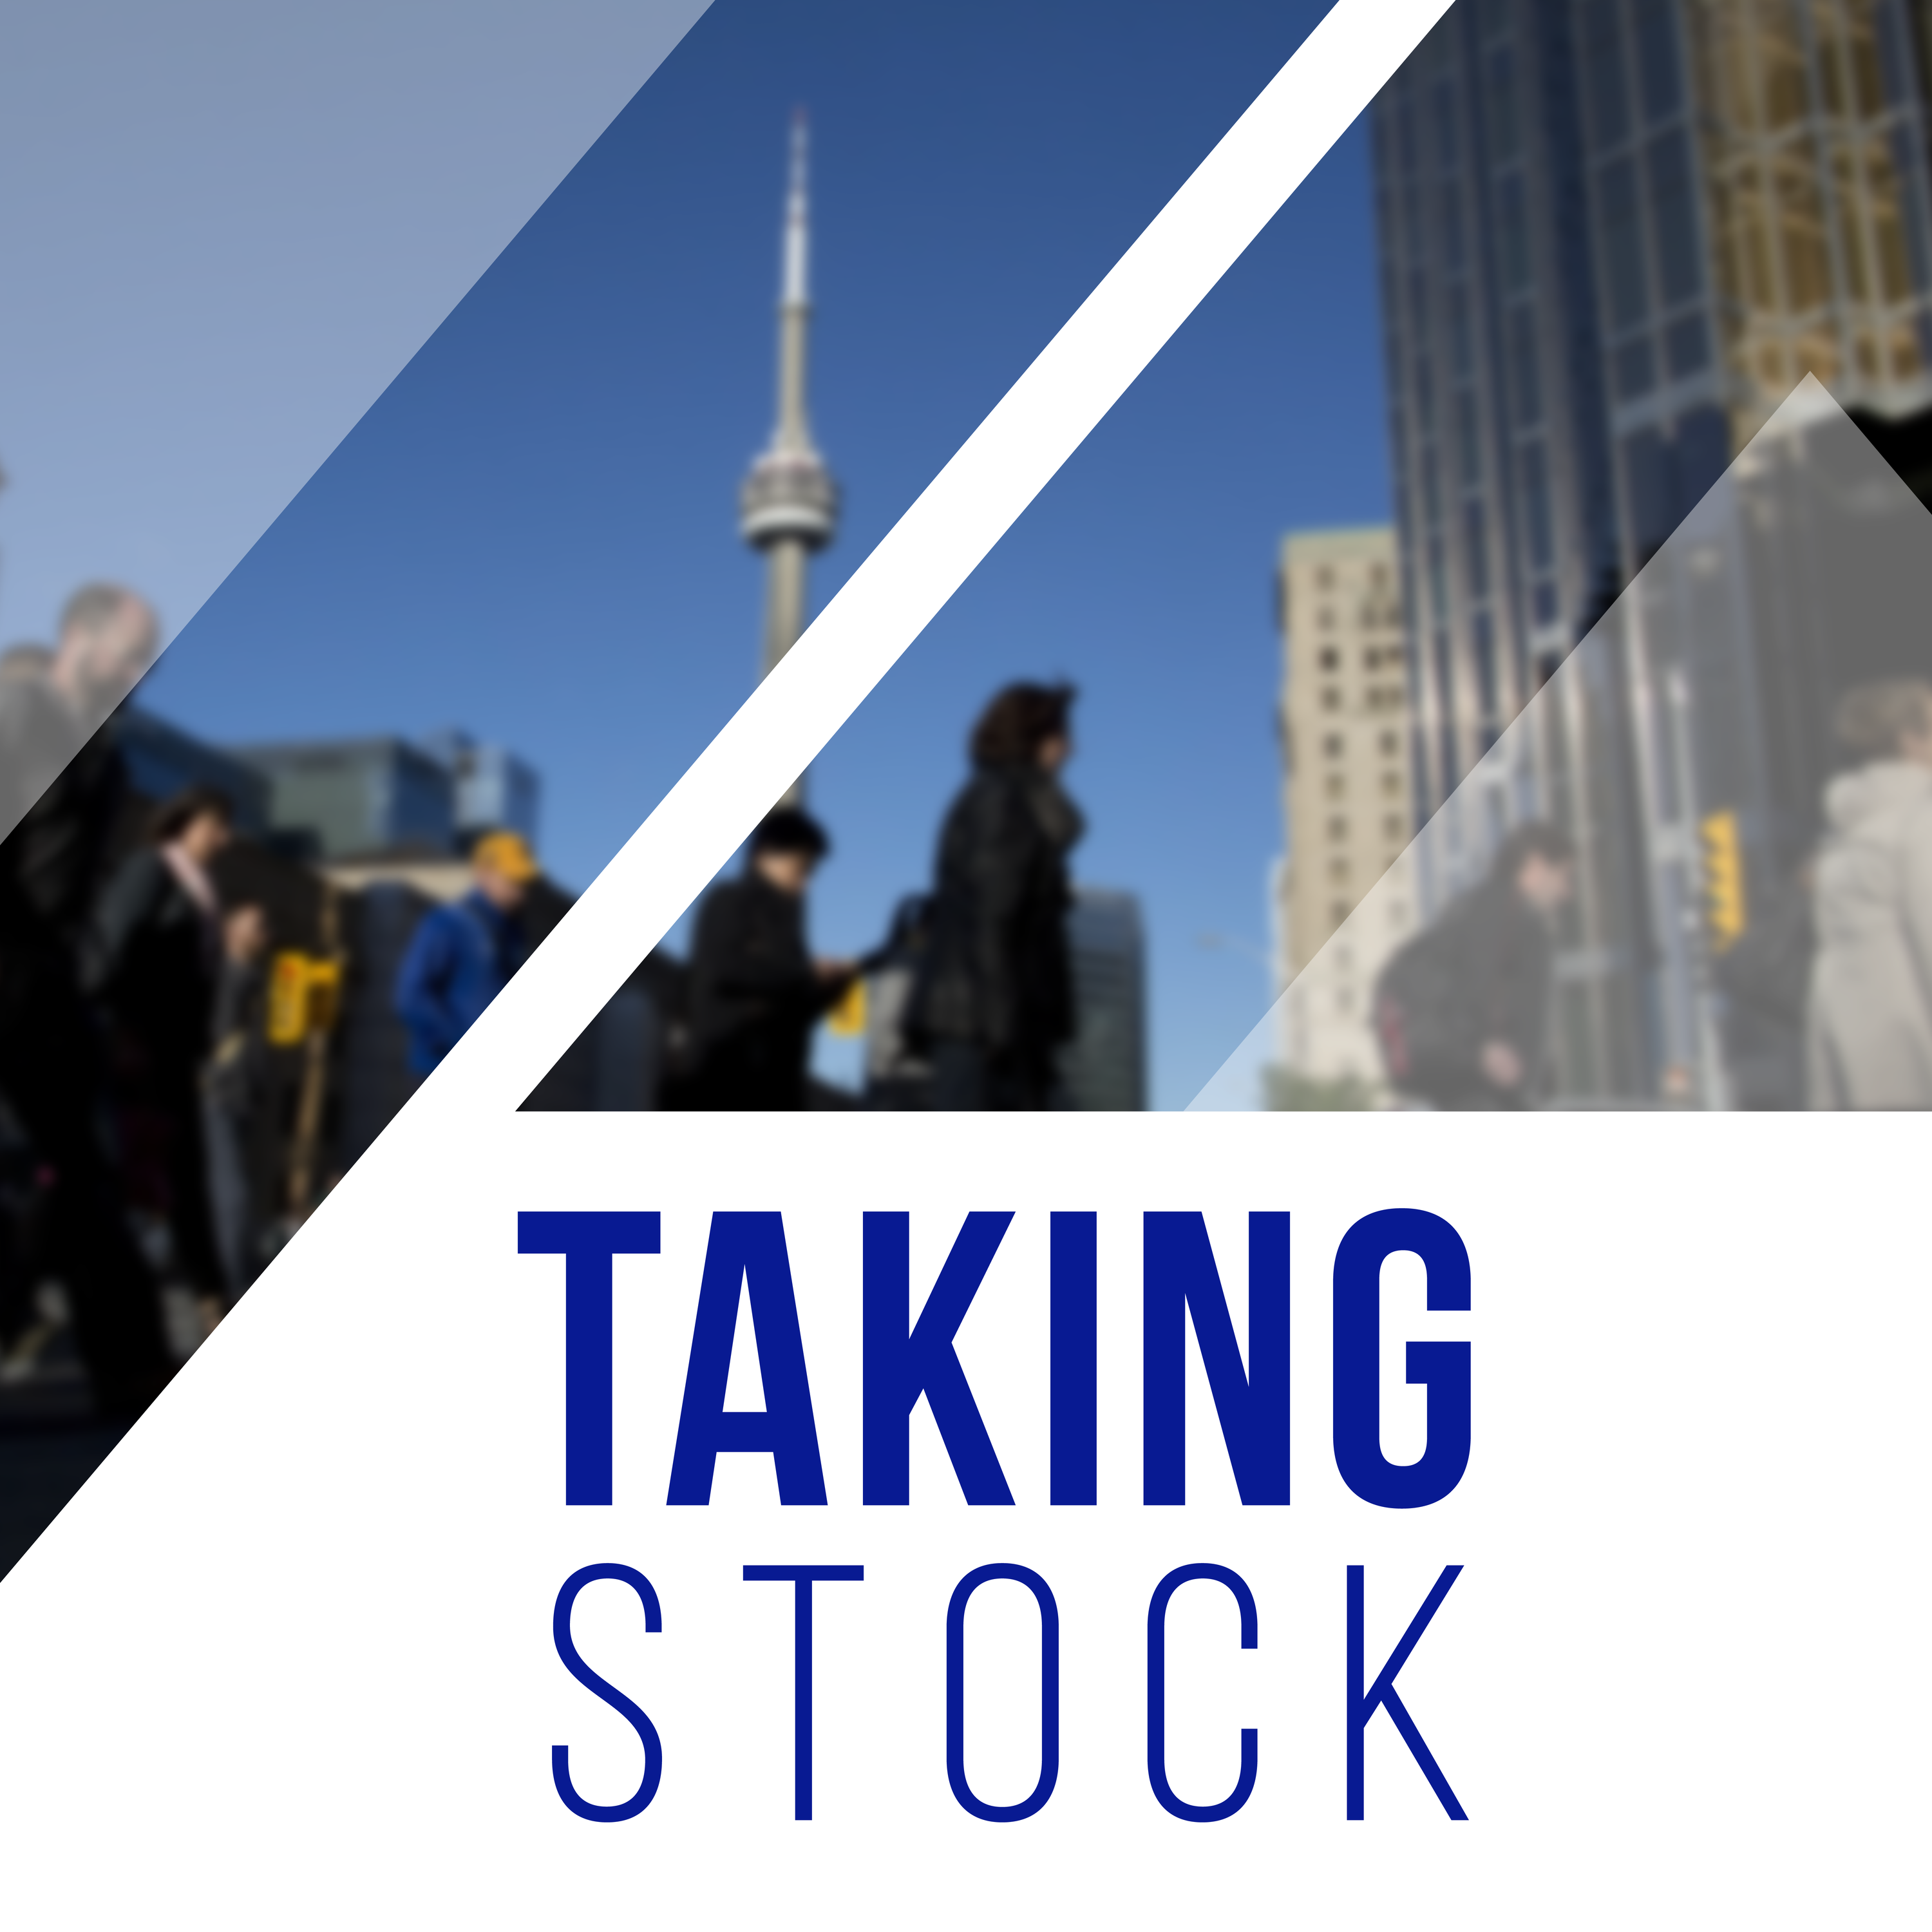 This week on Taking Stock: A feature interview with Alberta Premier Danielle Smith to discuss how Alberta can continue to grow its economy beyond fossil fuels, take the political temperature in the province and the her view on the role Alberta plays in a united Canada.